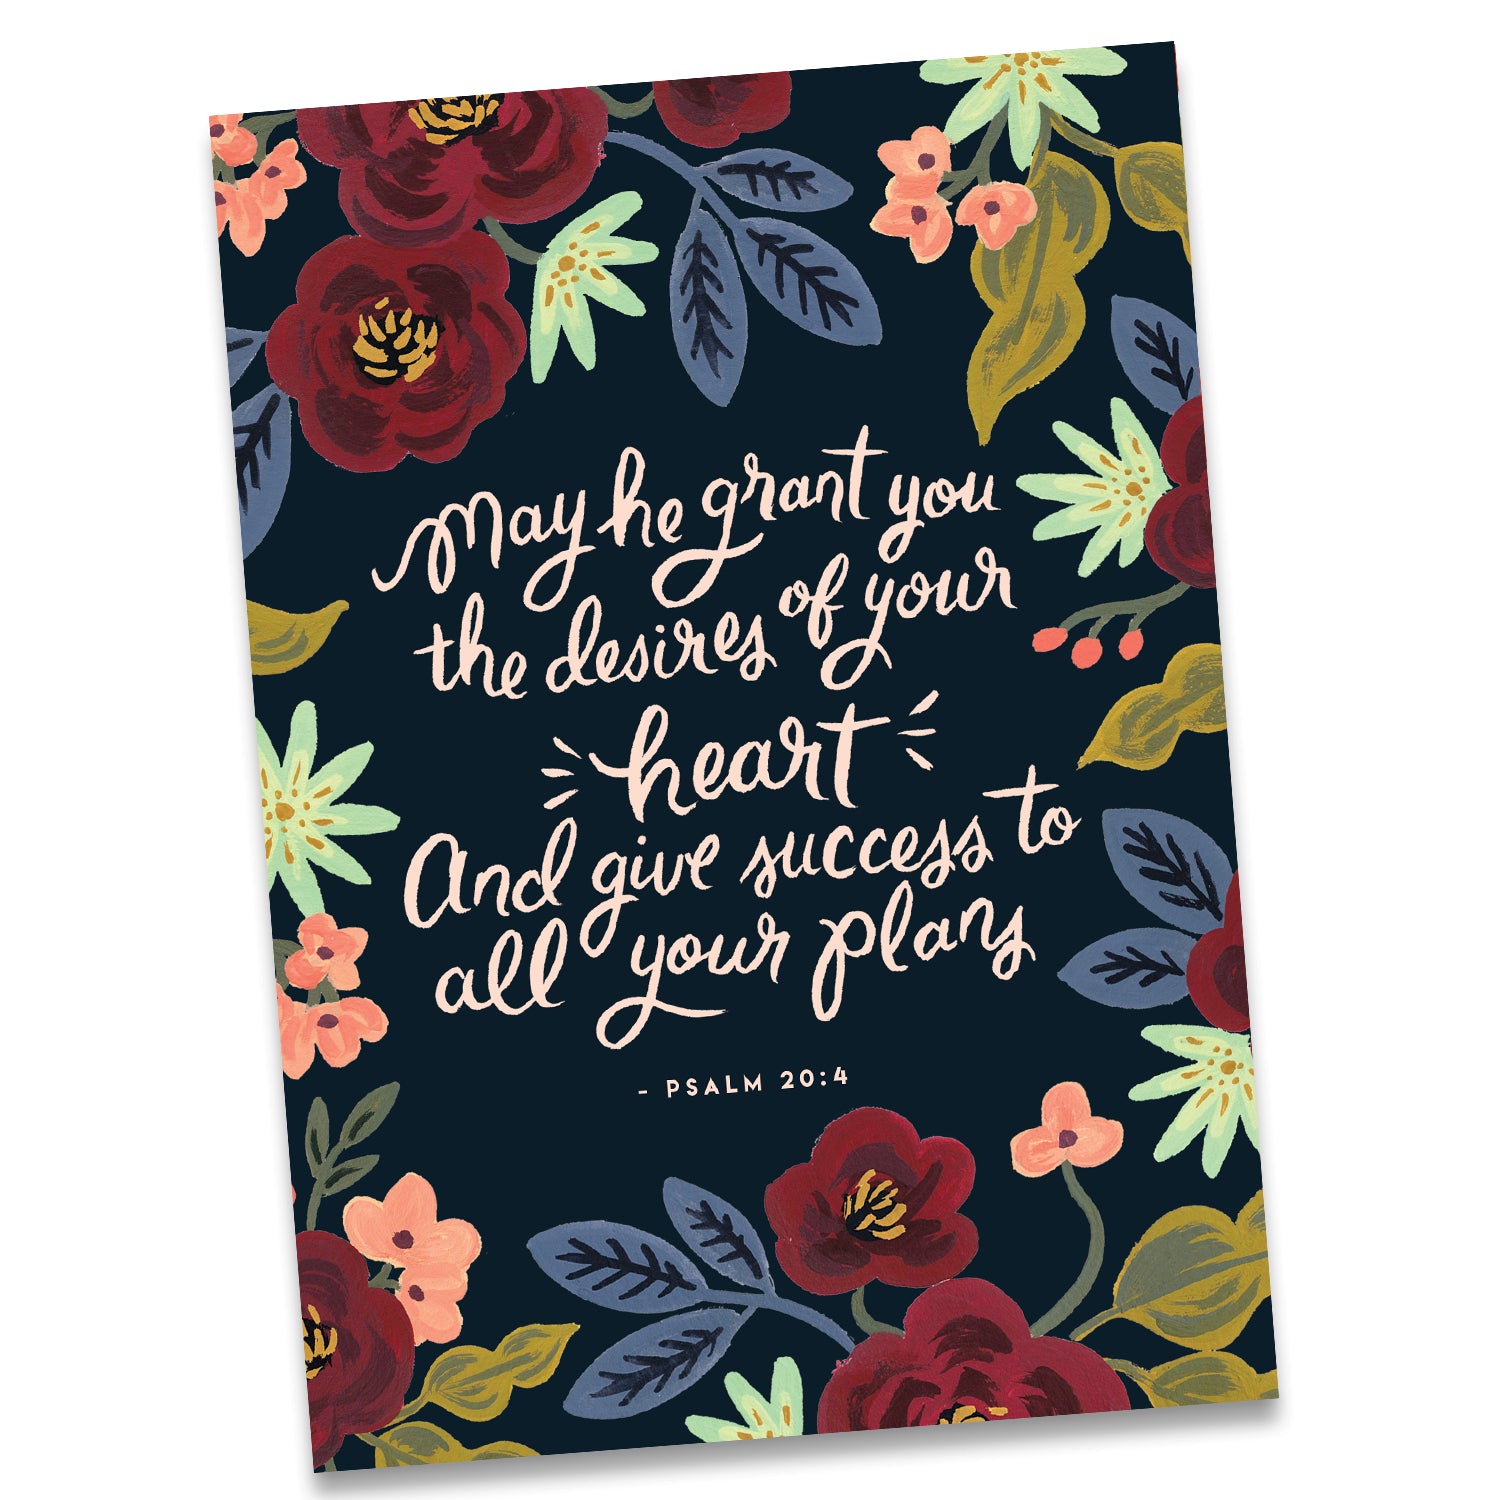 May He grant the desires of your heart... - Psalm 20:4 Greeting Card